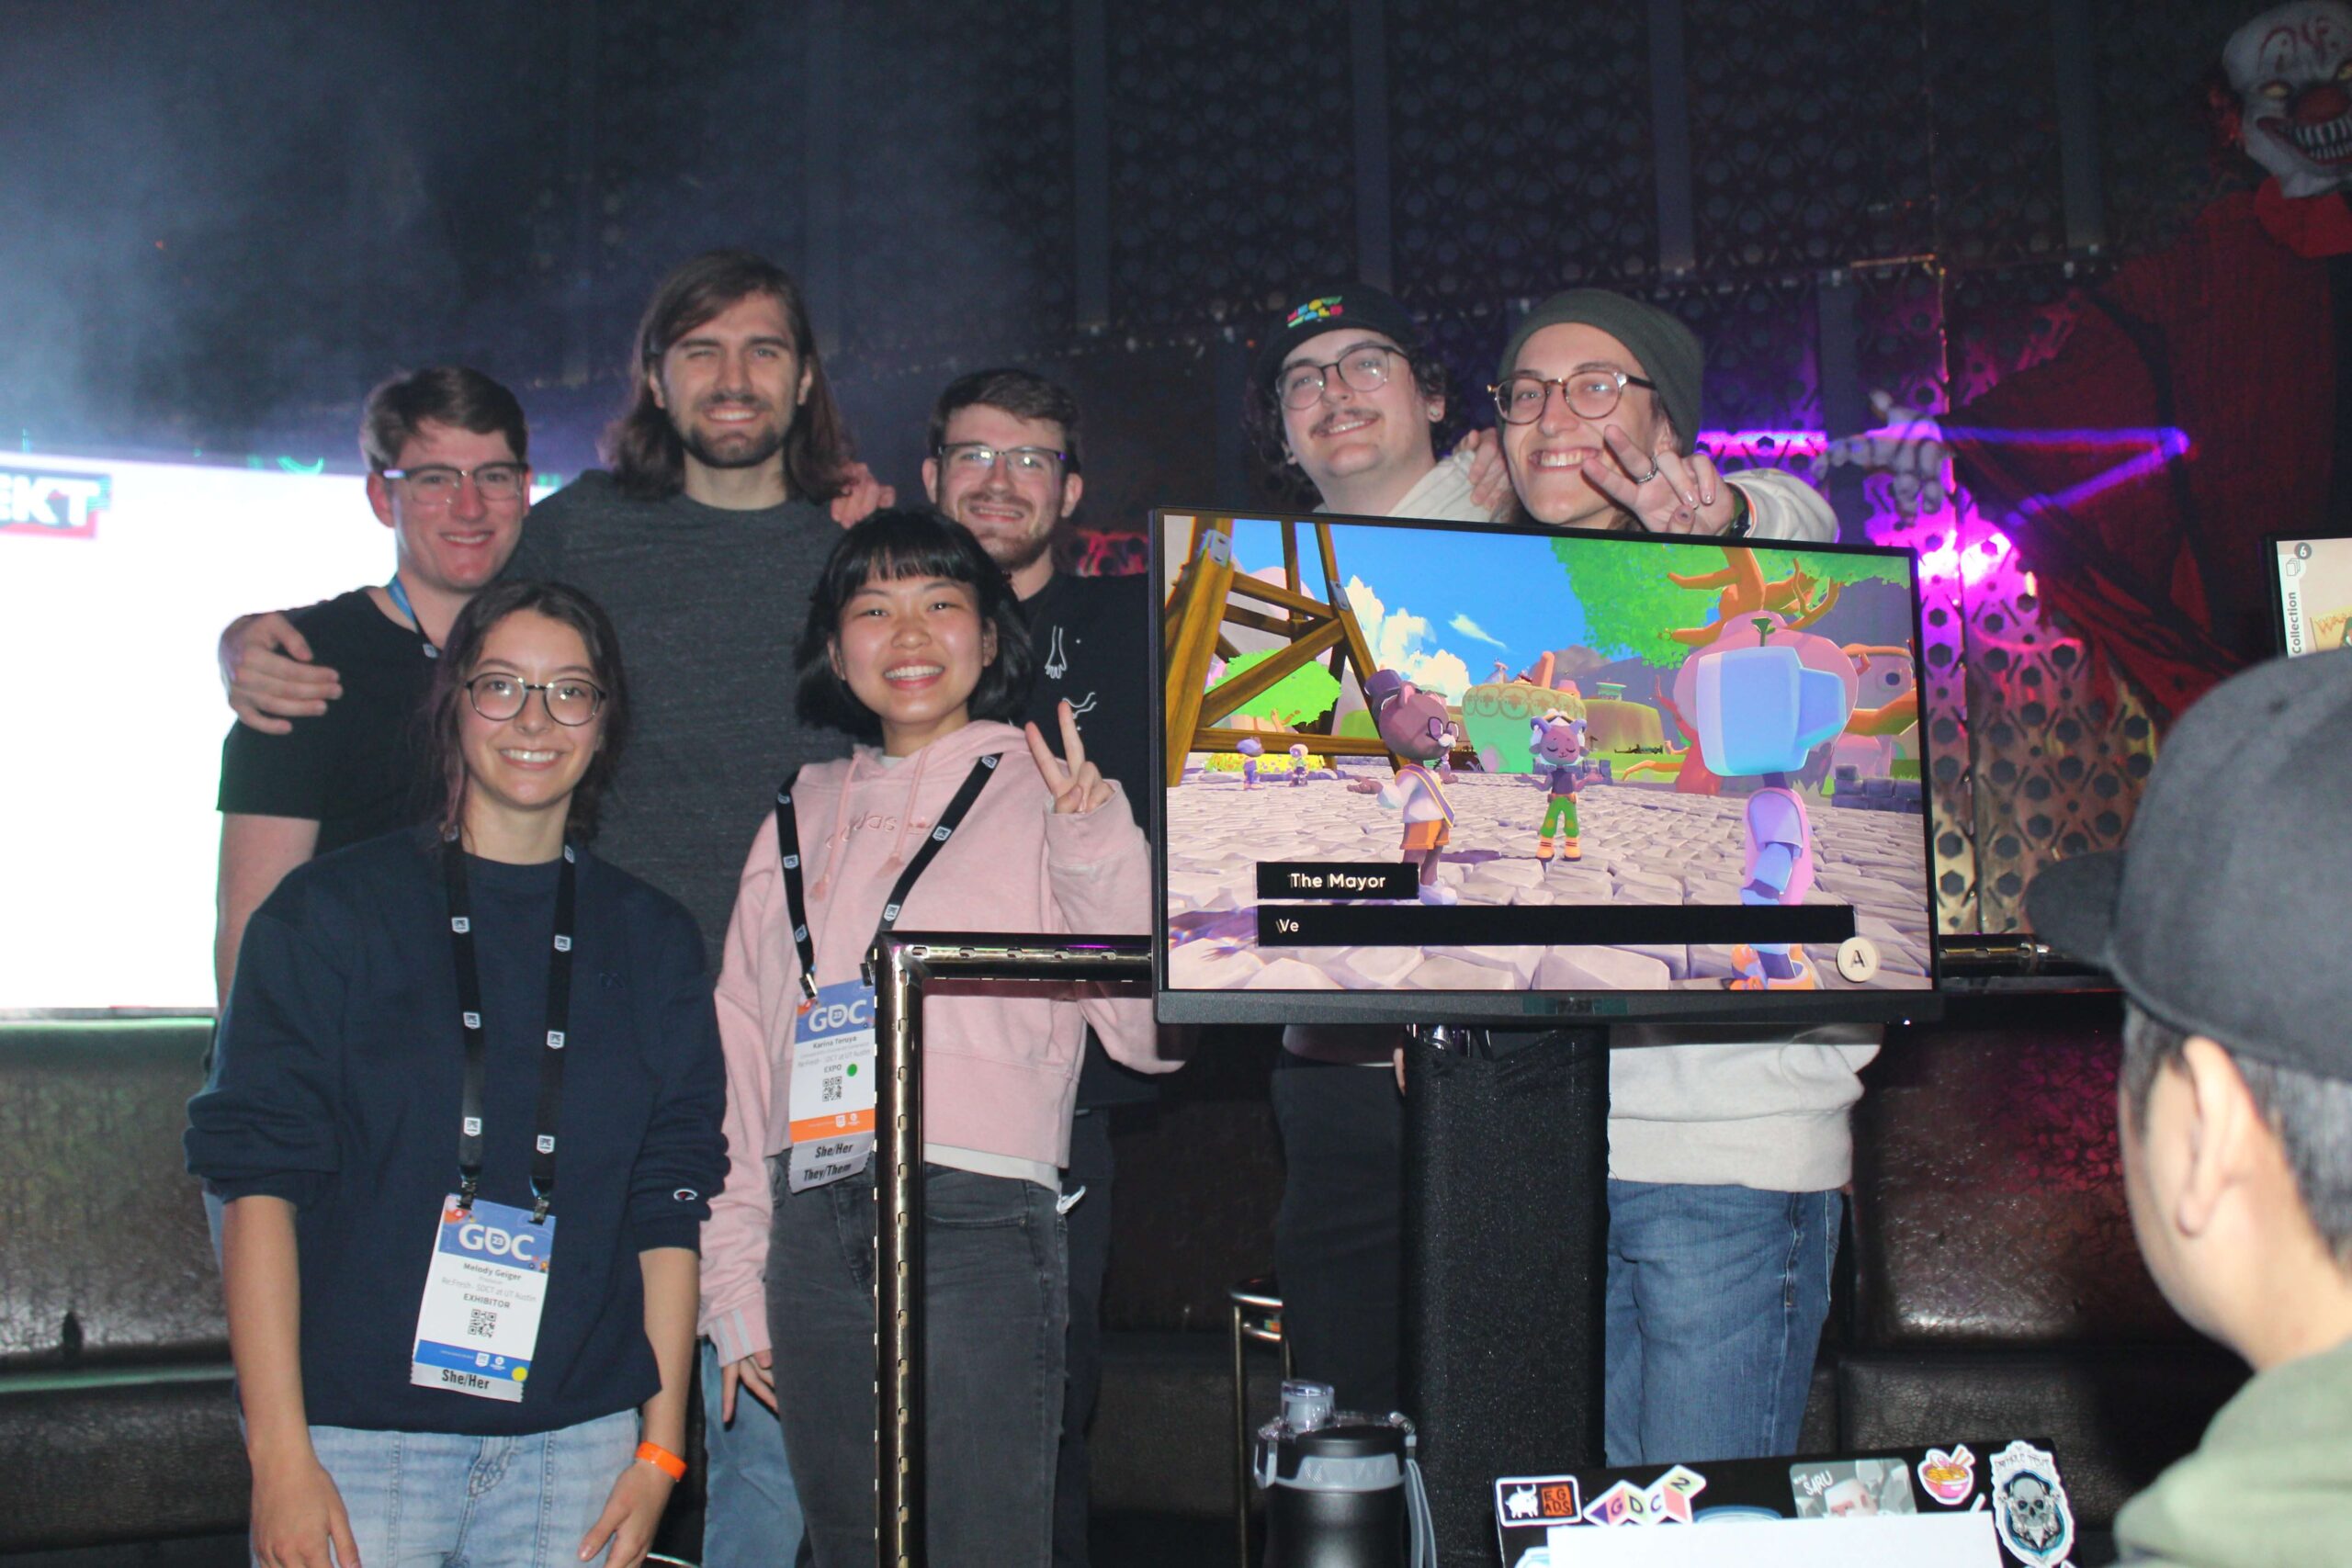 Group of people on stage with a computer monitor